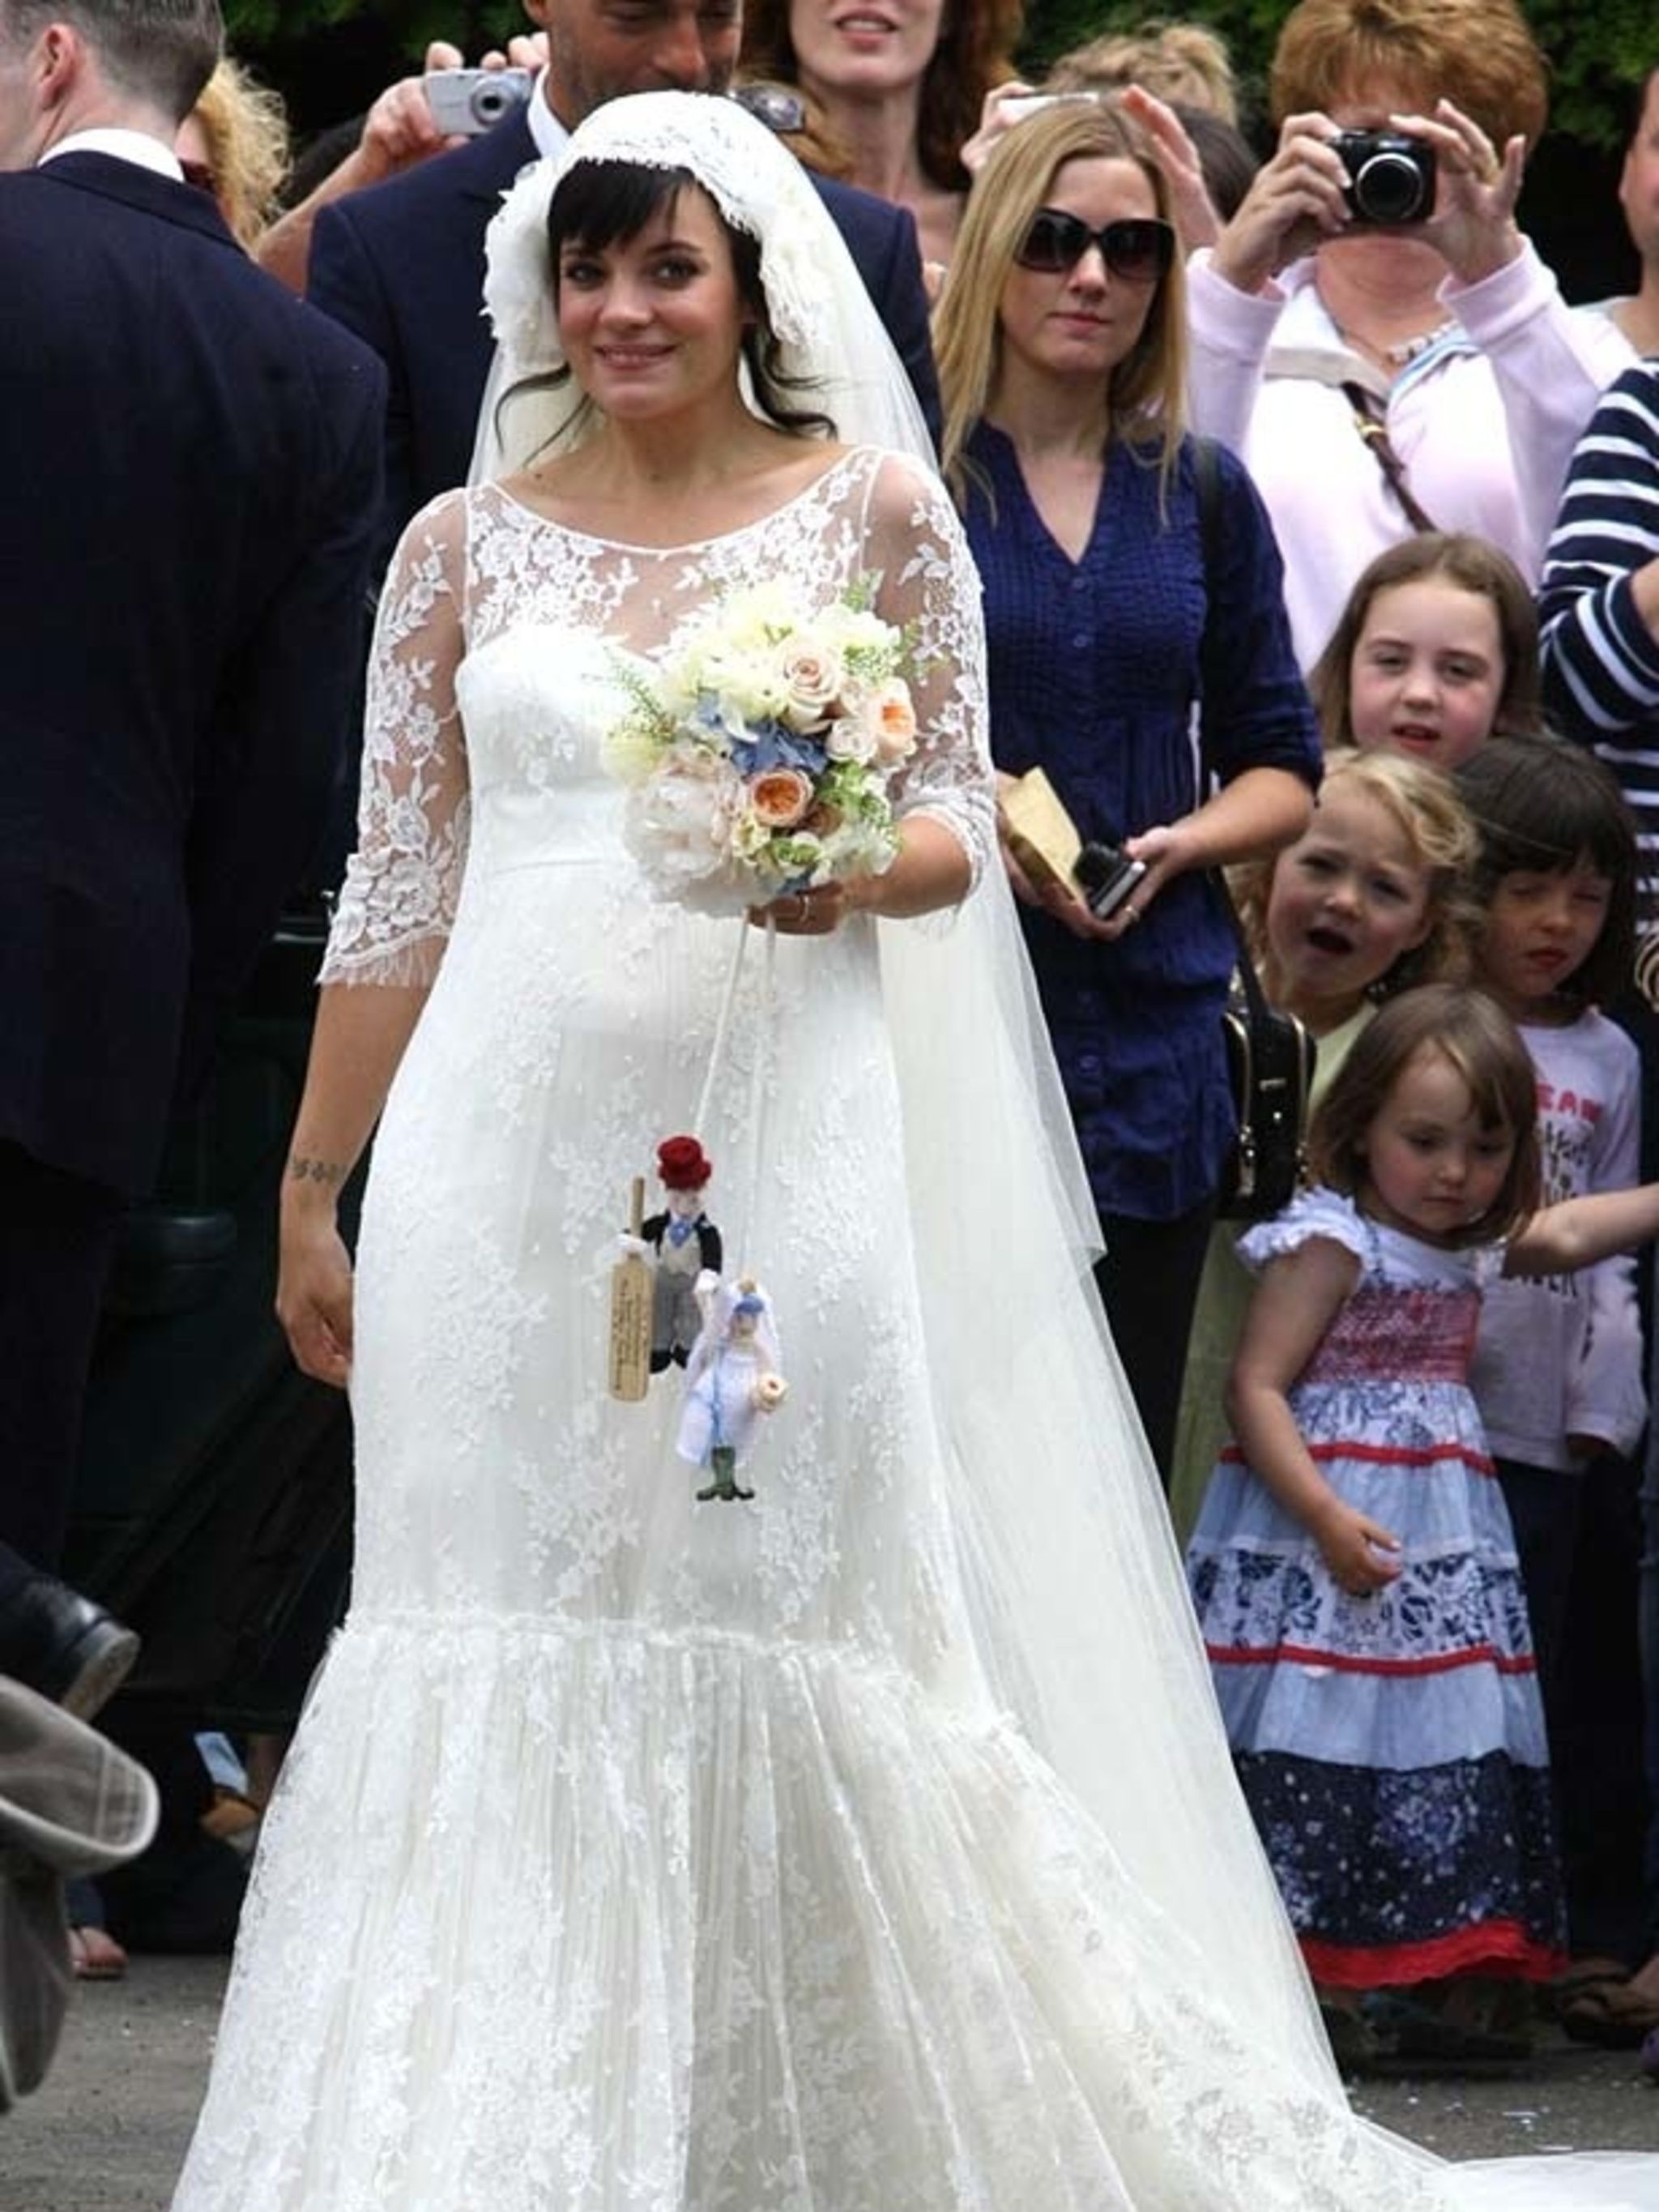 Blooming bride Lily Allen has a wedding day surprise